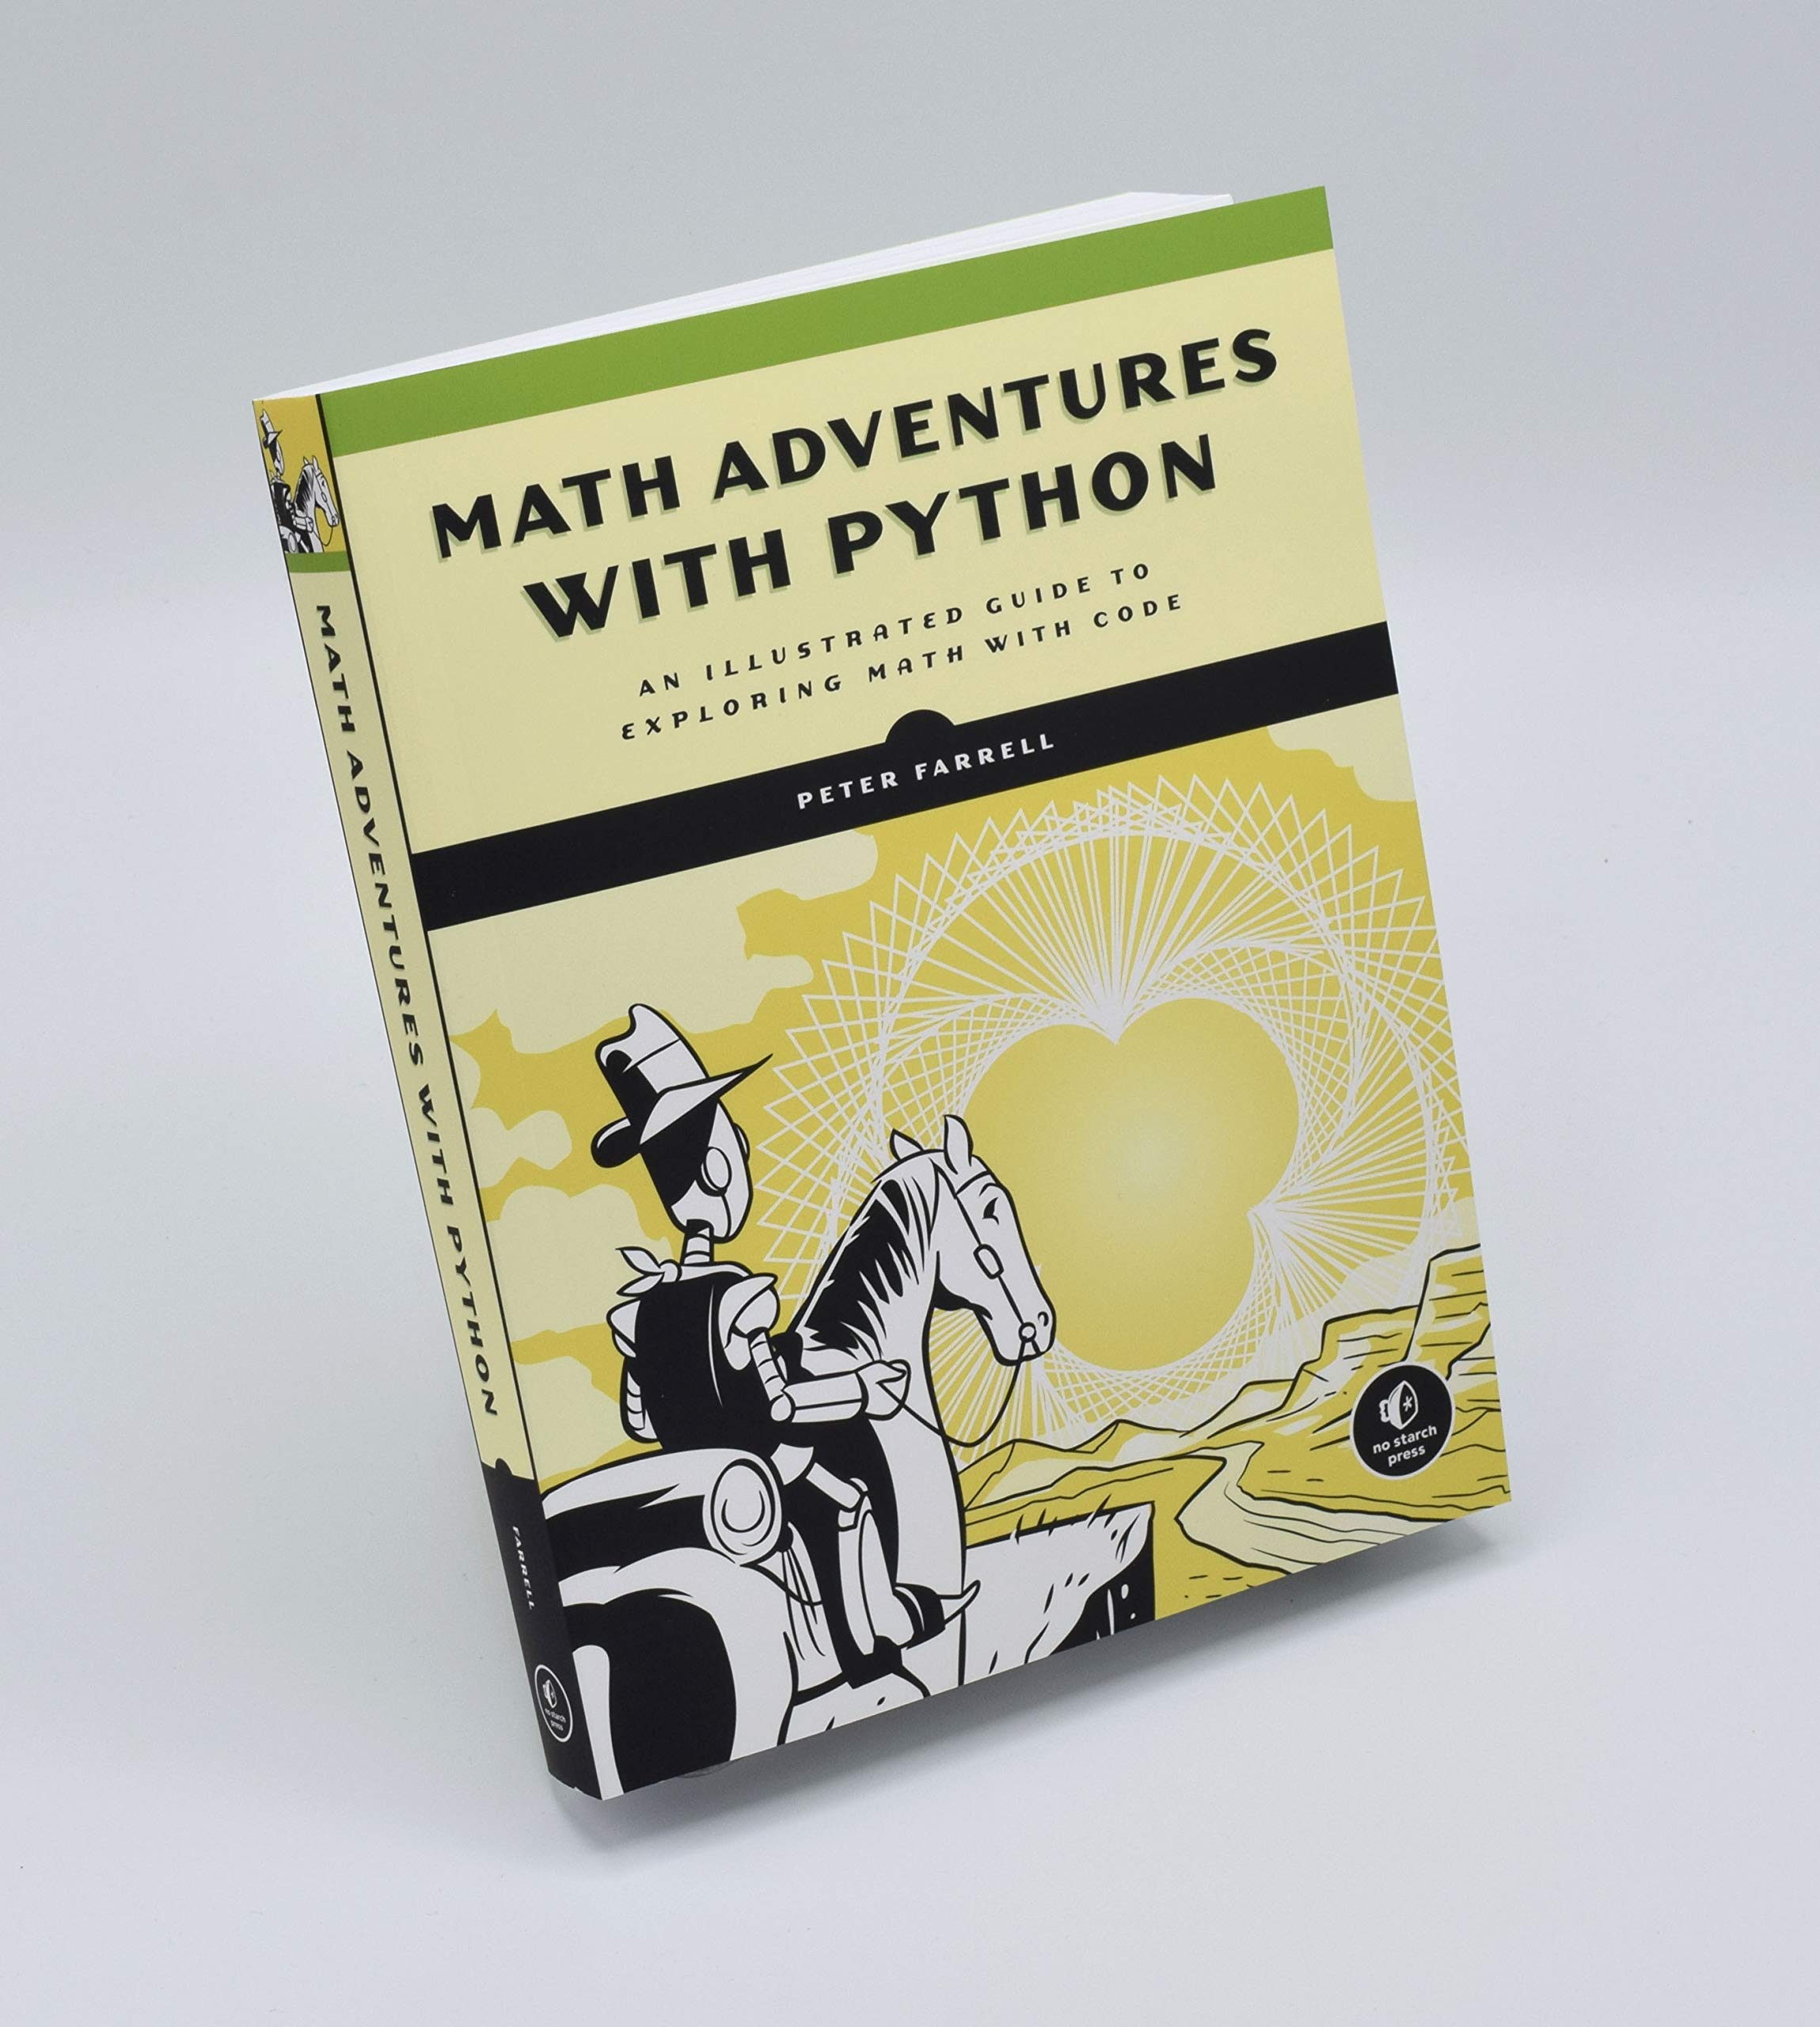 Math-Adventures-with-Python-cover.jpg